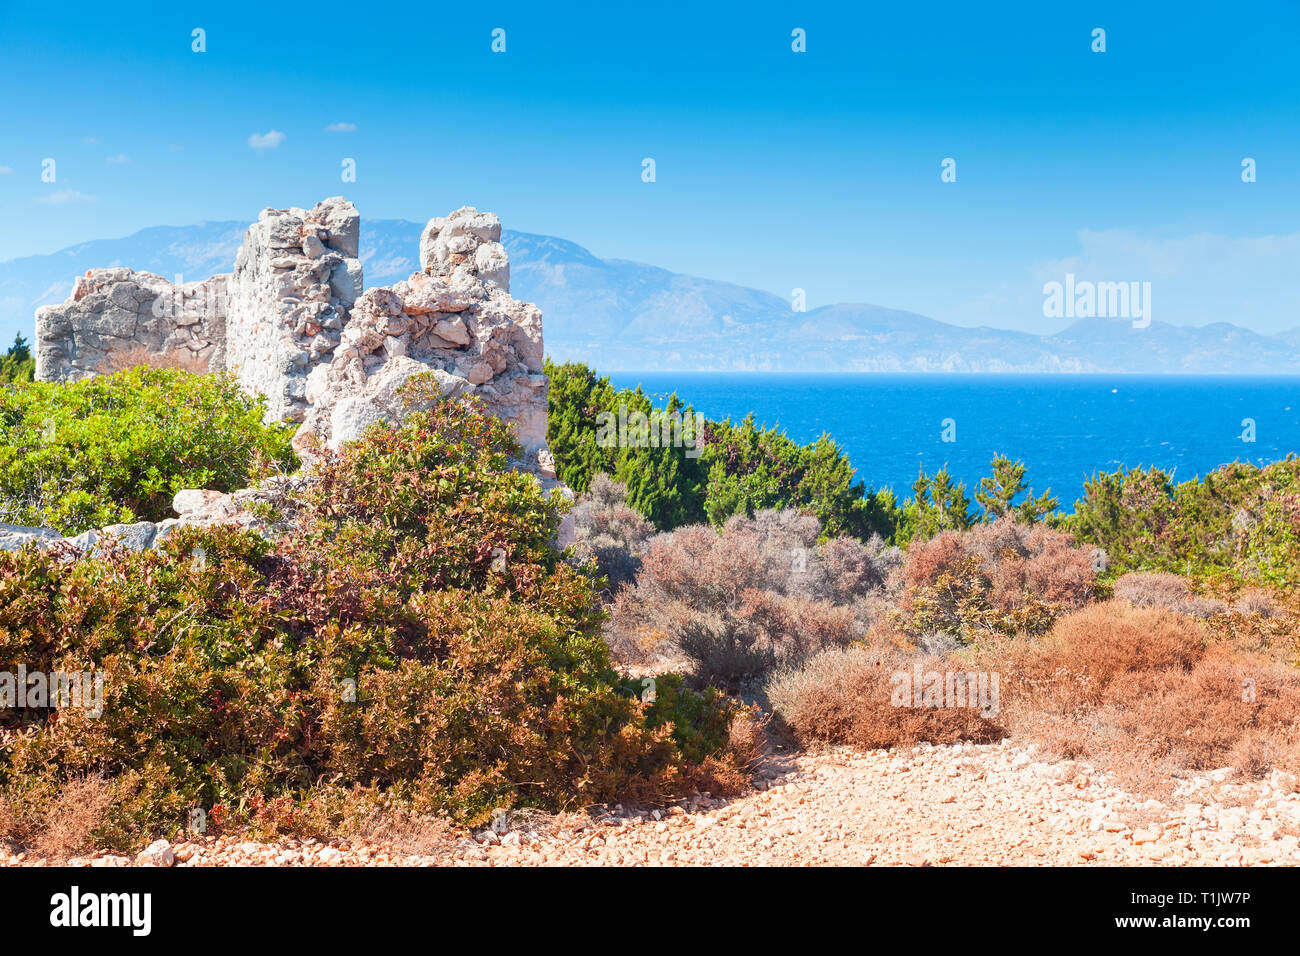 Summer landscape with ruins of white stone house. Zakynthos, Greek island in the Ionian Sea Stock Photo